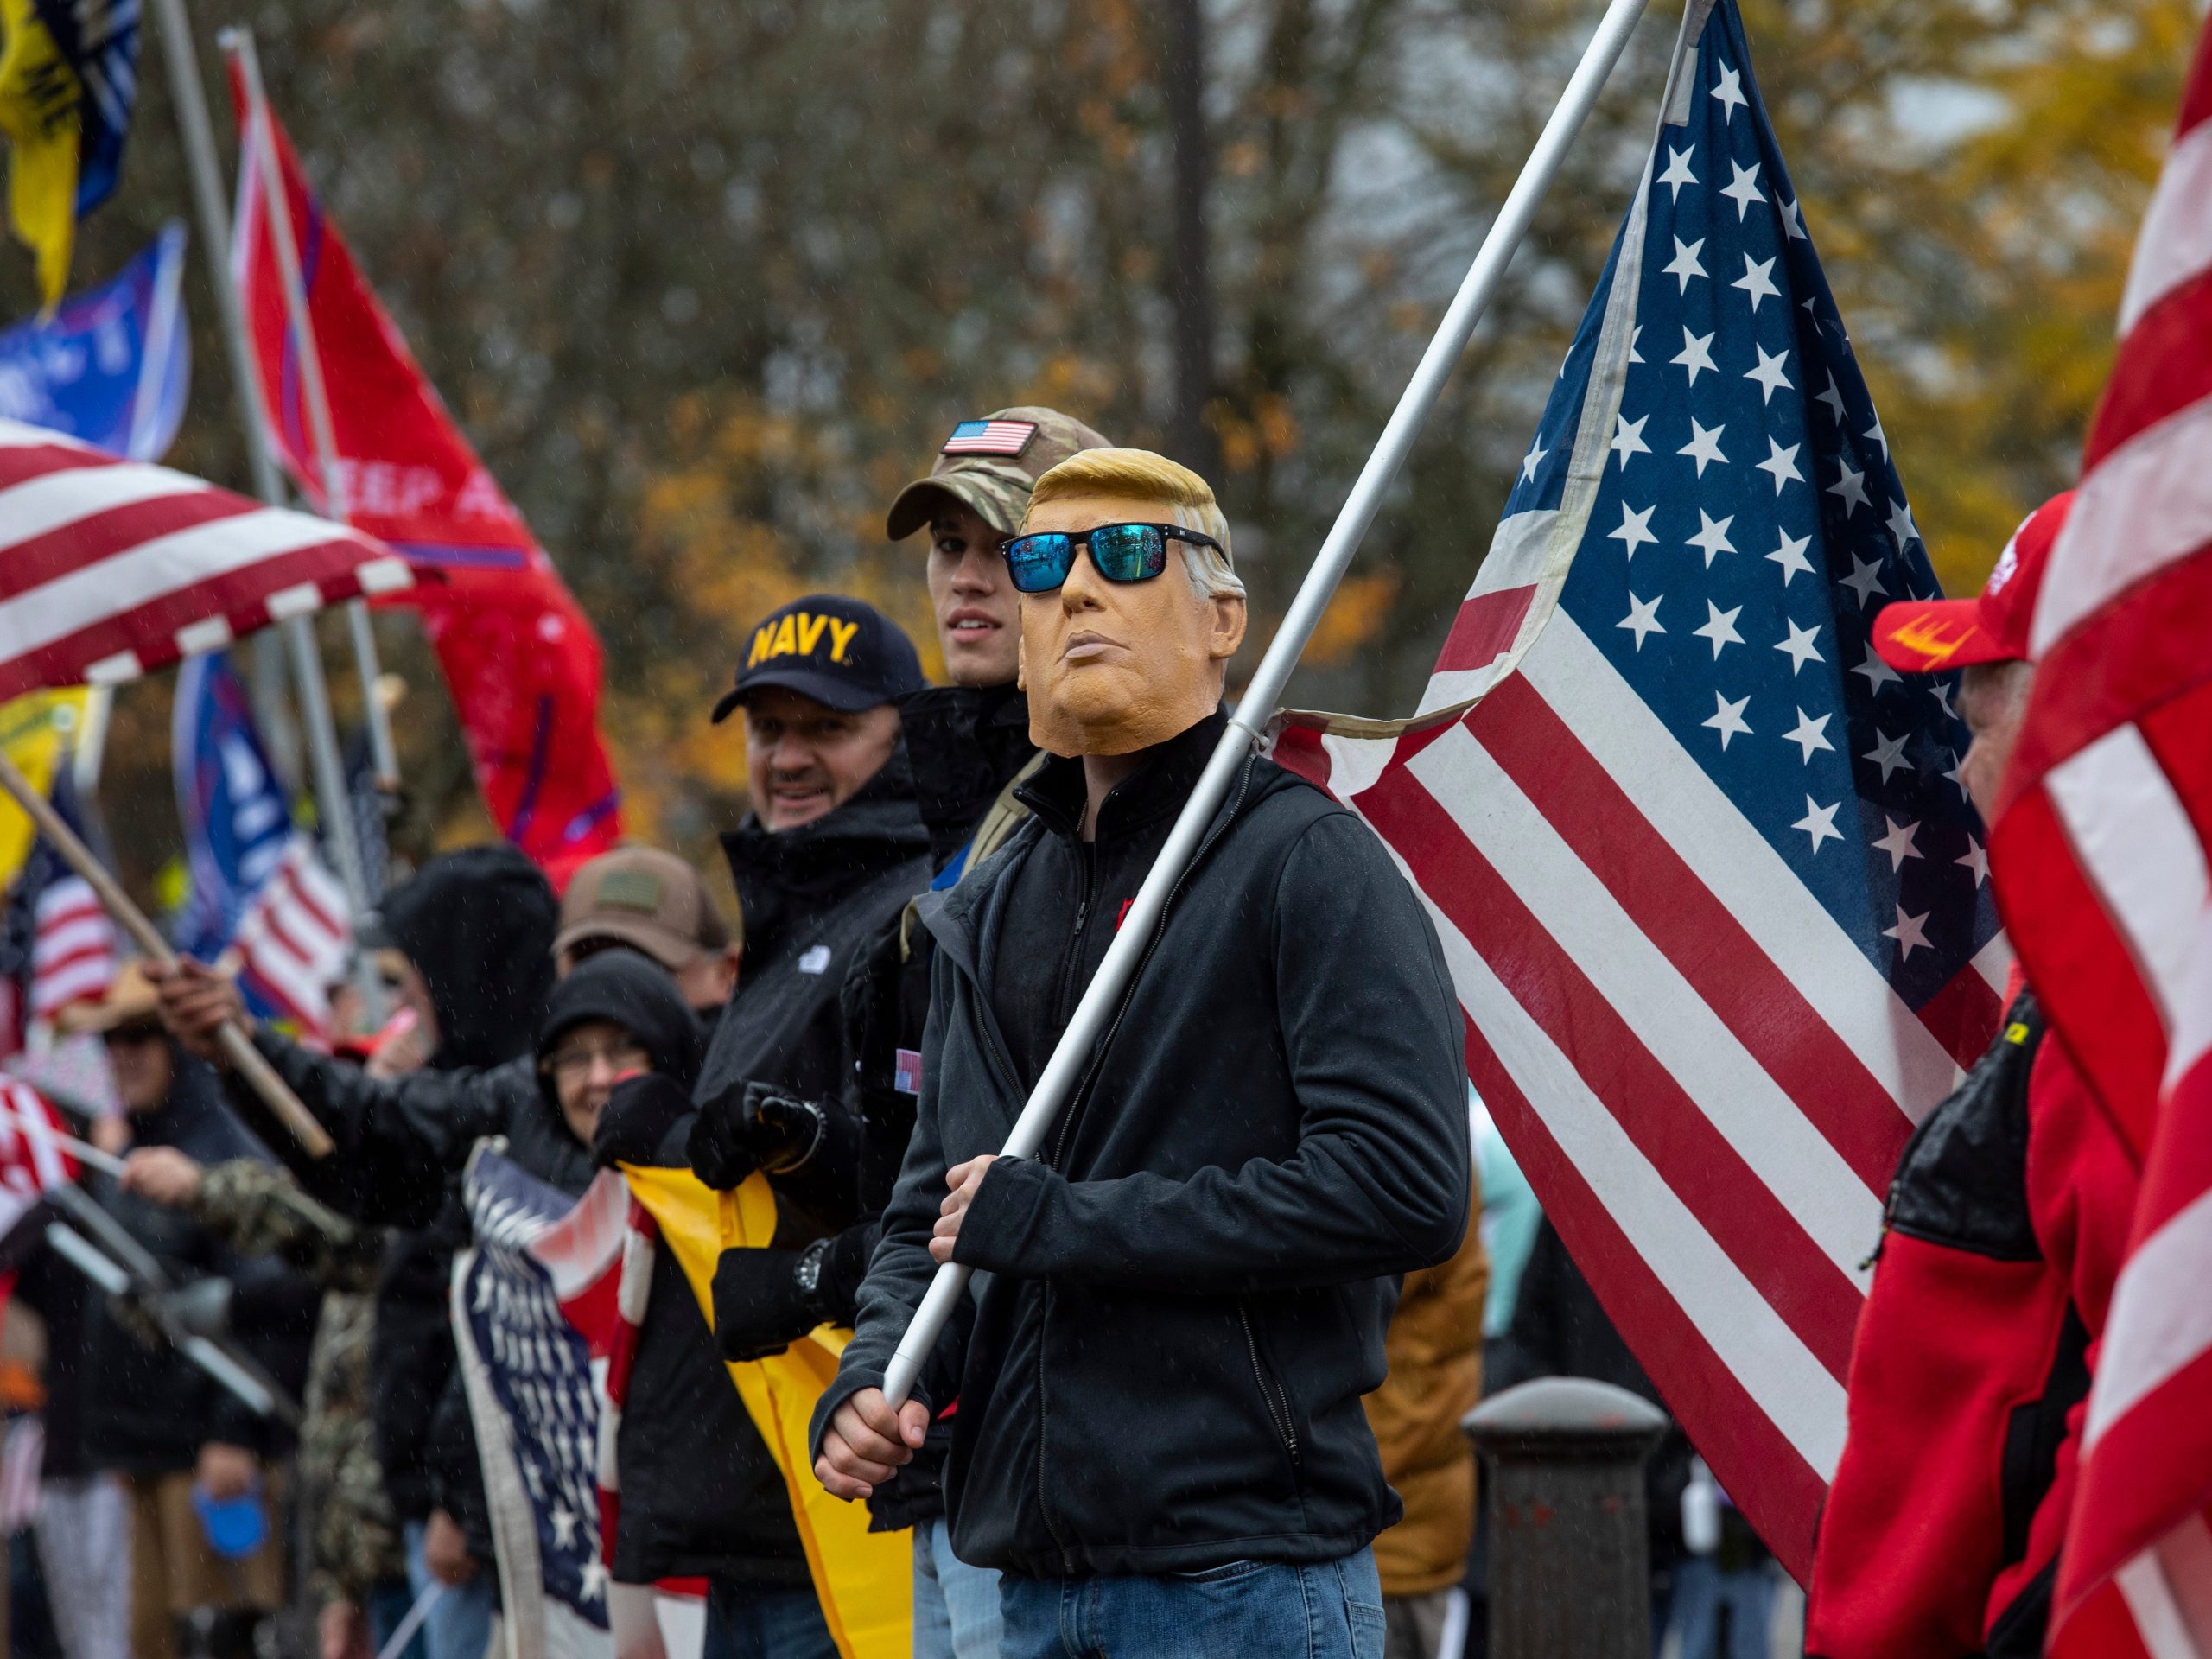 A group of Trump supporters stand carrying American flags, with one wear a Trump mask and sunglasses